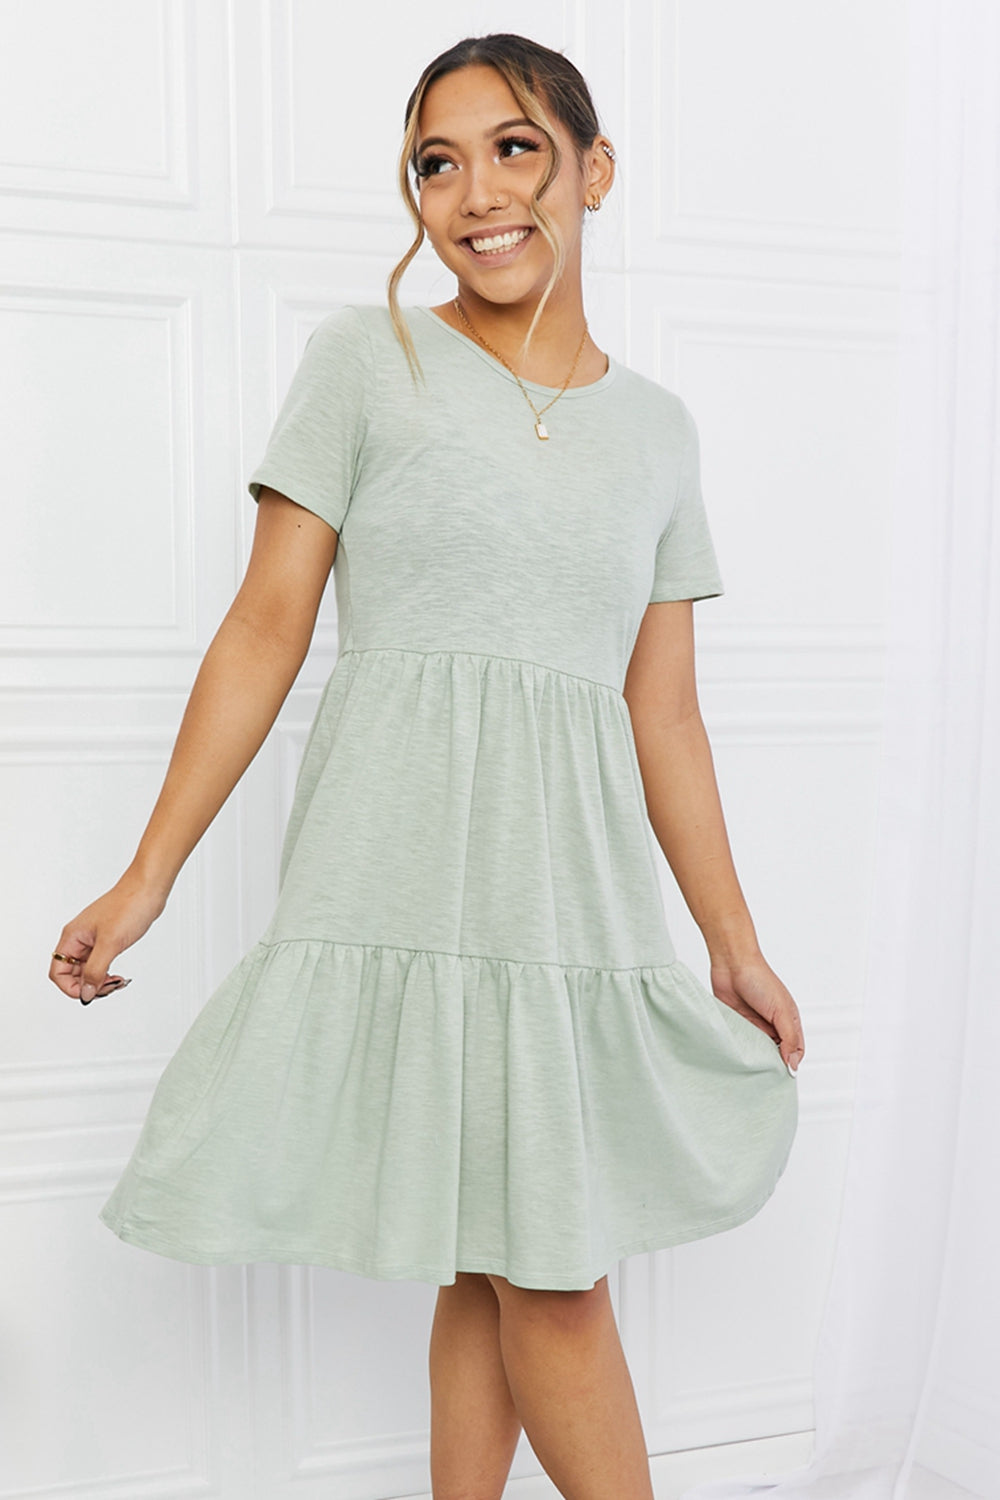 Short Sleeve Round Neck Tiered Tee Dress - Green / S - All Dresses - Dresses - 1 - 2024